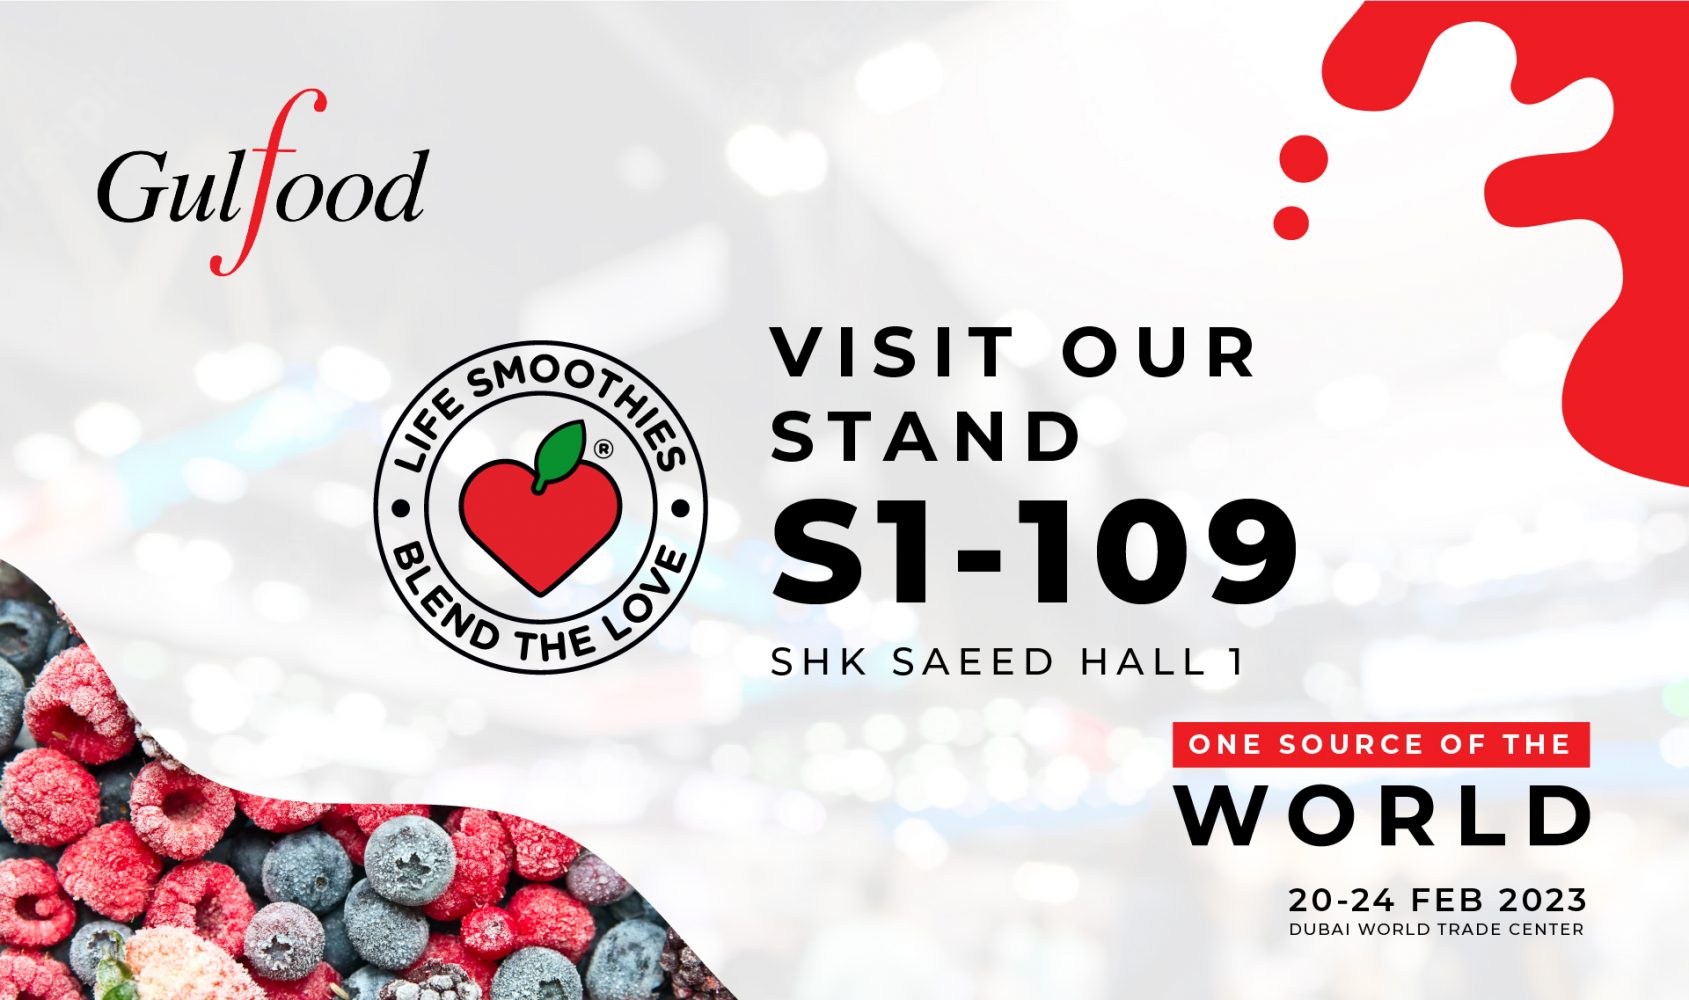 Gulfood 2023, One of the Most Important Events in the F&B Industry, returns to Dubai